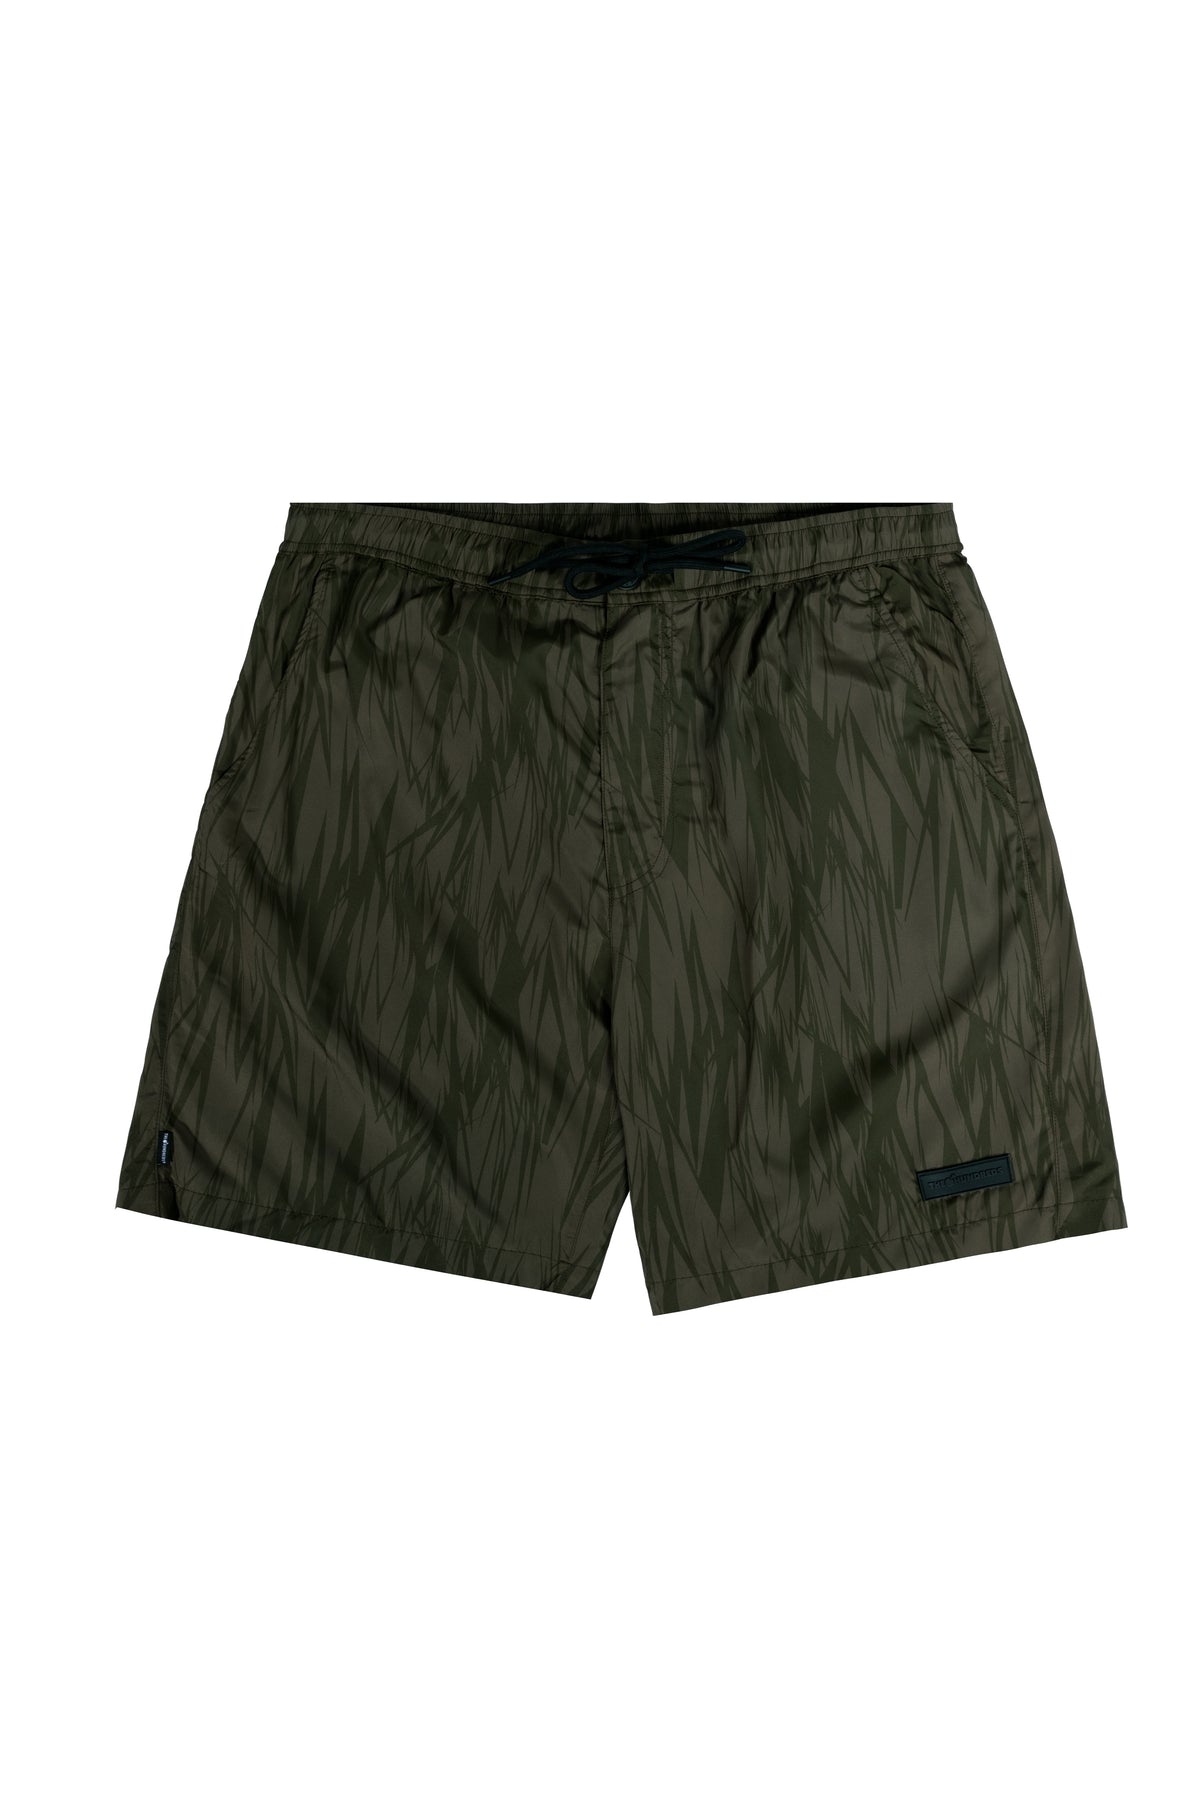 The Hundreds jags packable shorts olive